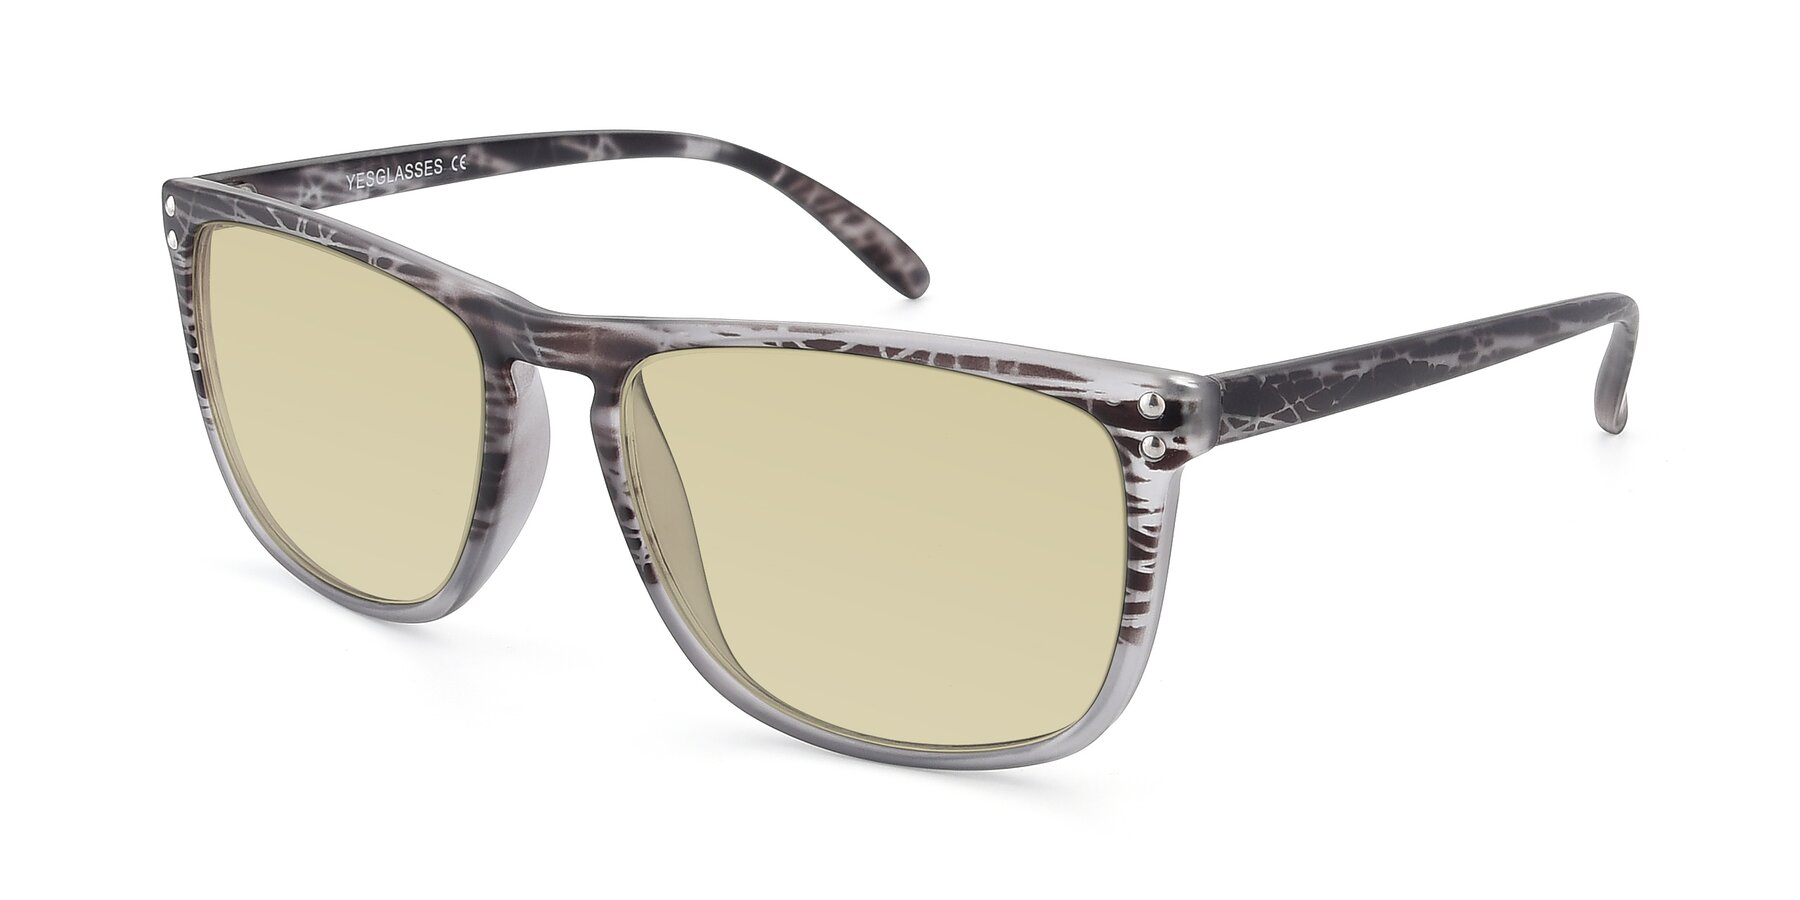 Angle of SSR411 in Translucent Floral Grey with Light Champagne Tinted Lenses